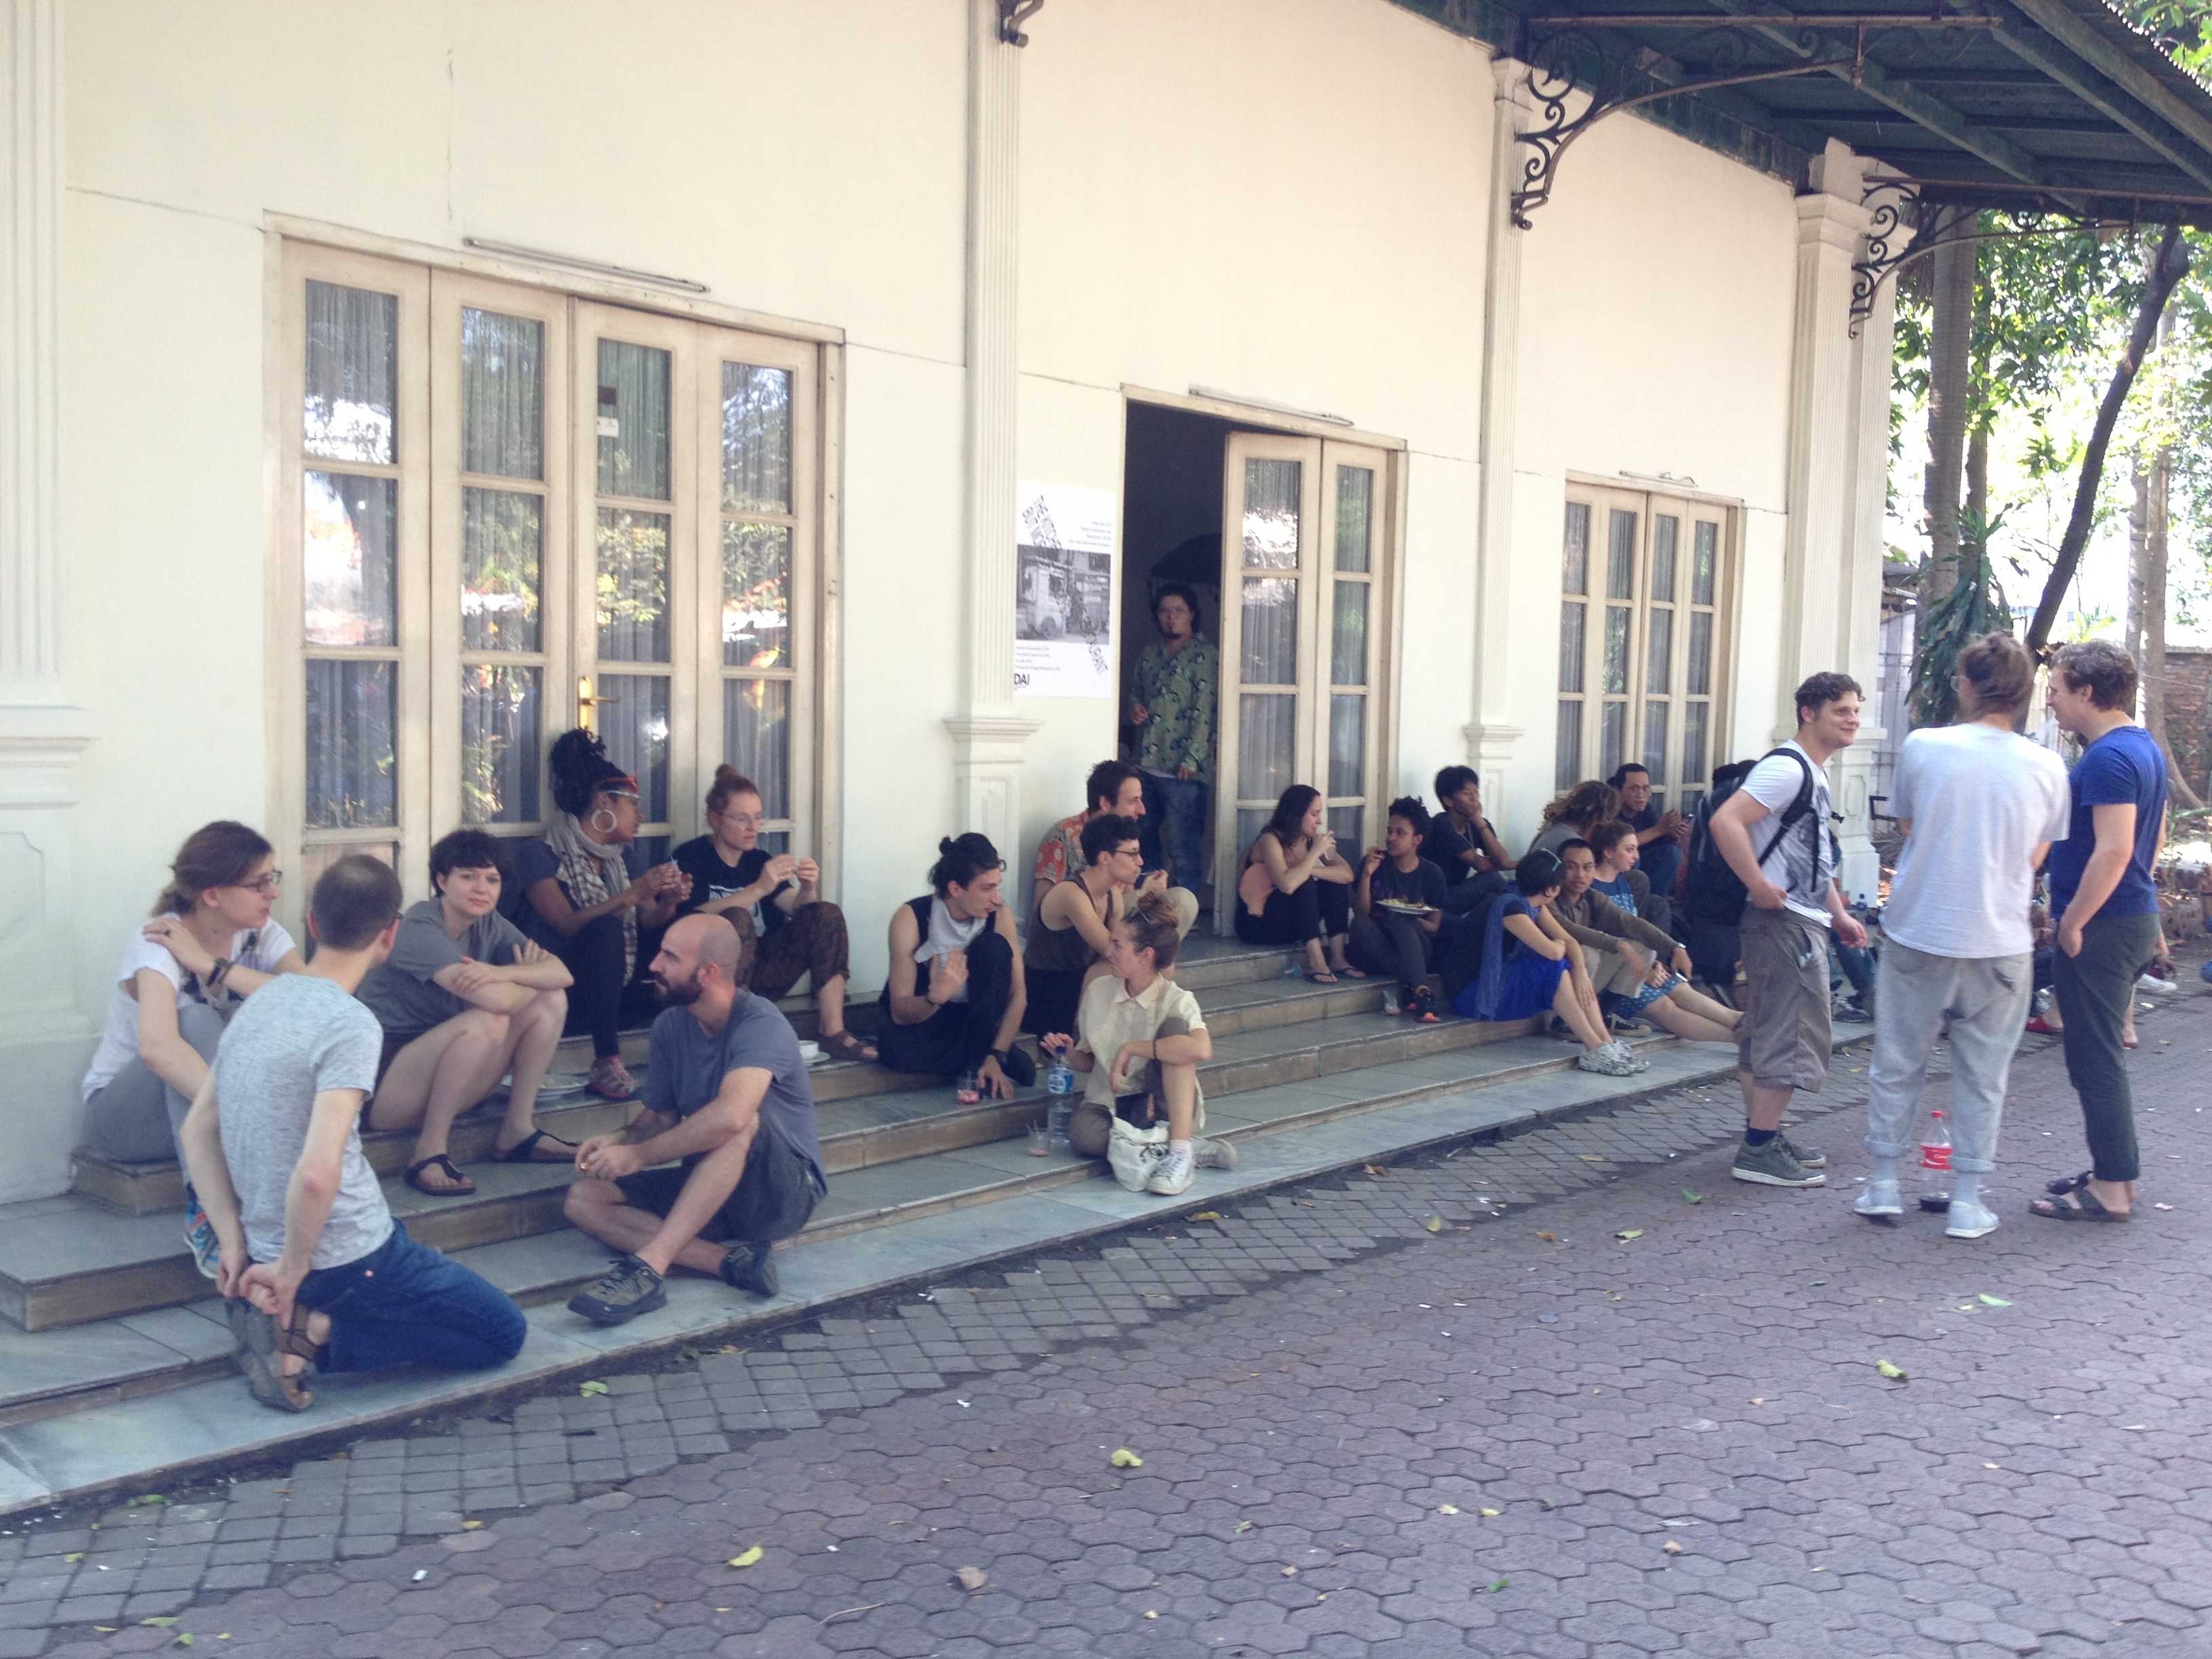 DAI's Roaming Academy in front of the Soebardjo-house in Jakarta. Image credit: Martha Jager